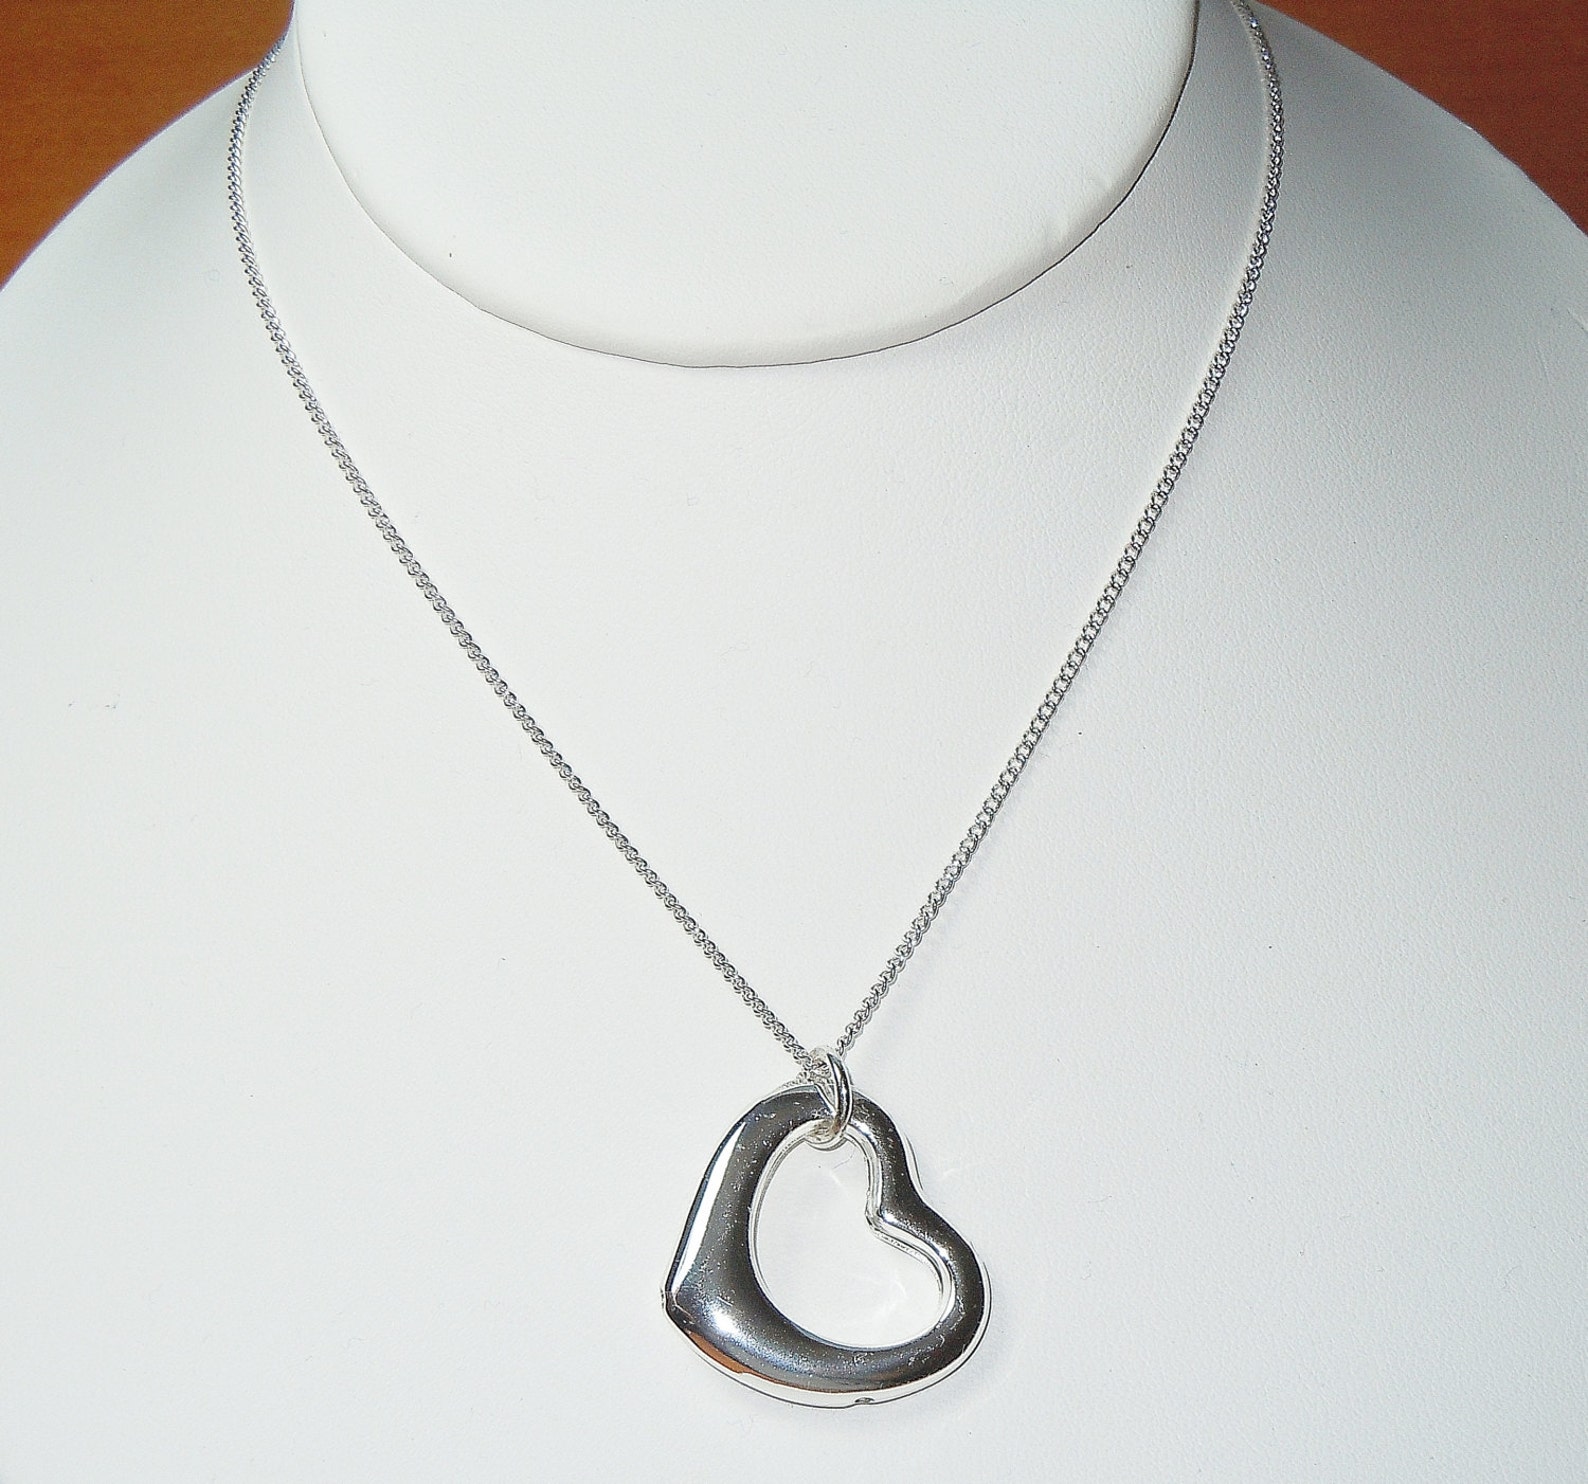 Silver Open Floating Heart Pendant Necklace on Silver Chain - Etsy